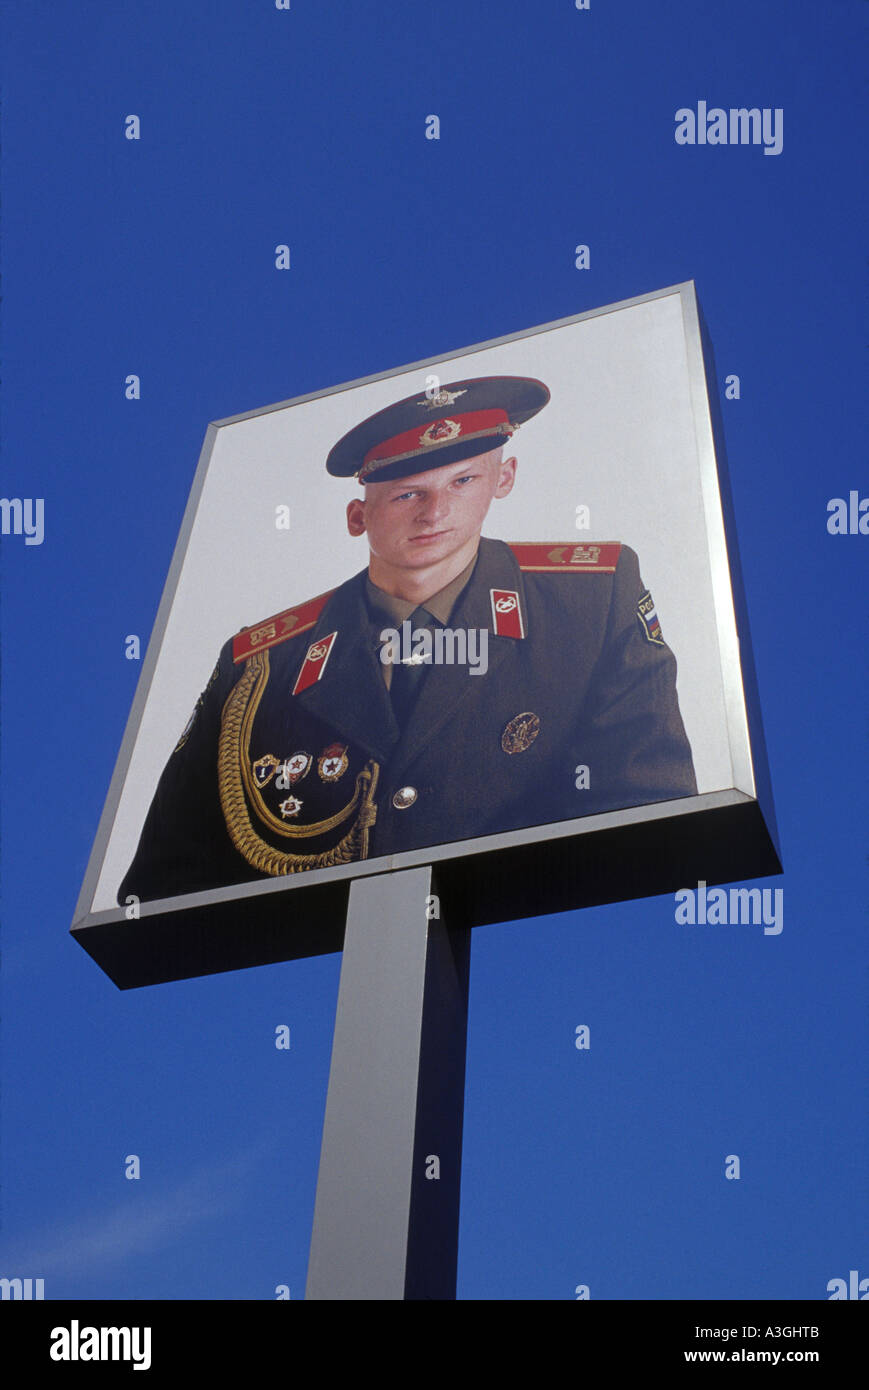 Image of a Soviet Soldier at the site of Checkpoint Charlie in Berlin, Germany Stock Photo